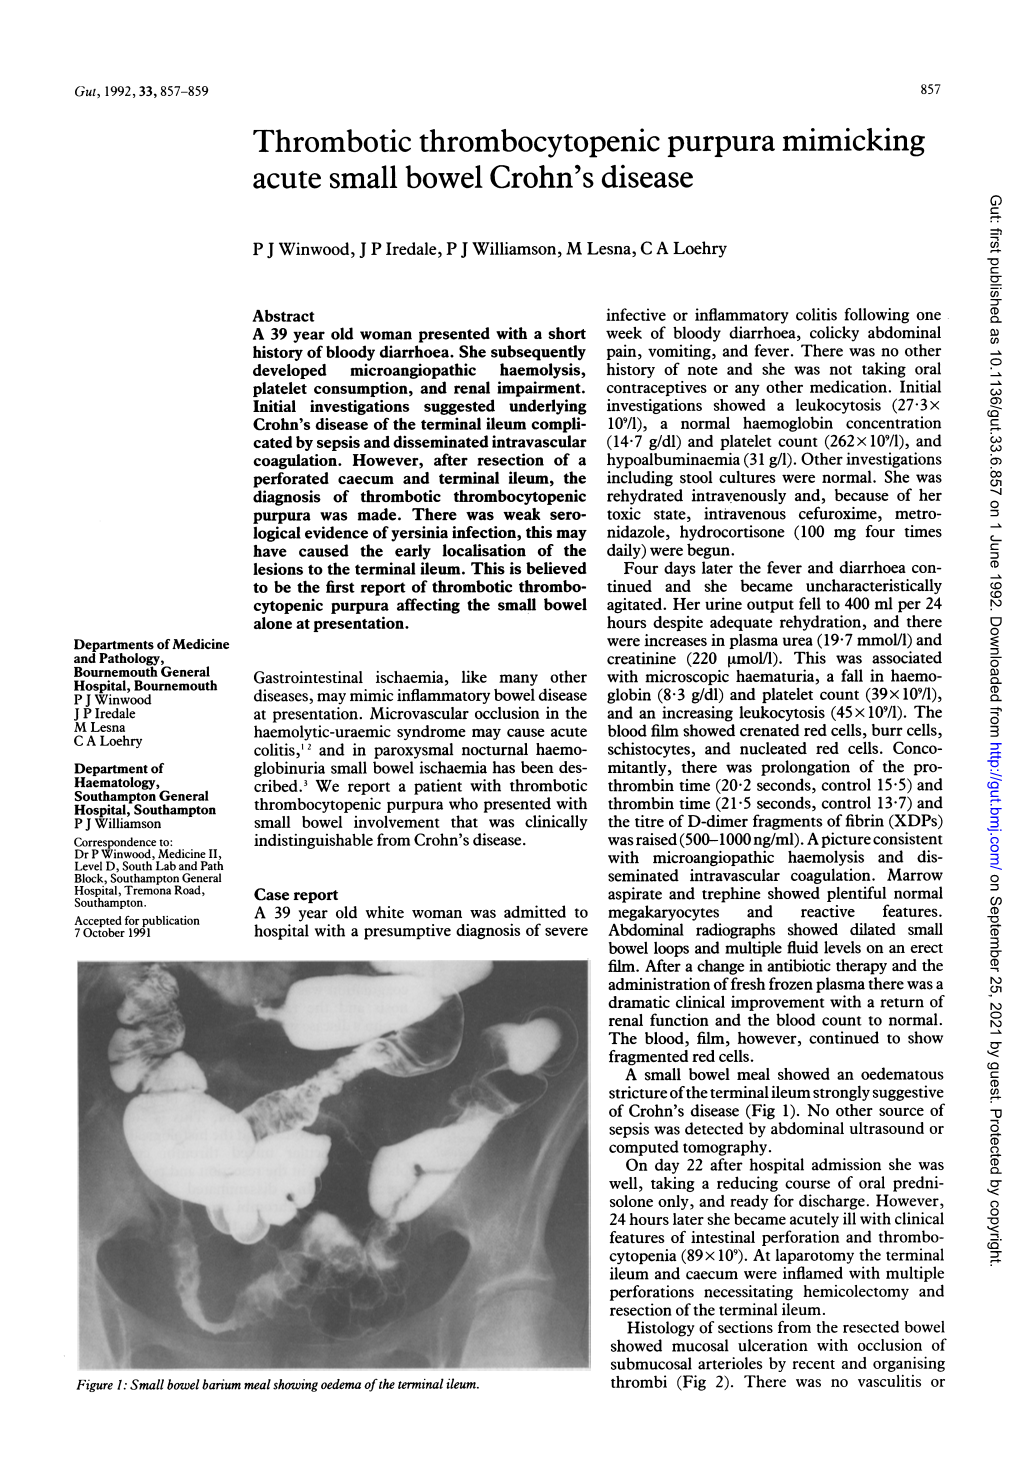 Thrombotic Thrombocytopenic Purpura Mimicking Acute Small Bowel Crohn's Disease Gut: First Published As 10.1136/Gut.33.6.857 on 1 June 1992